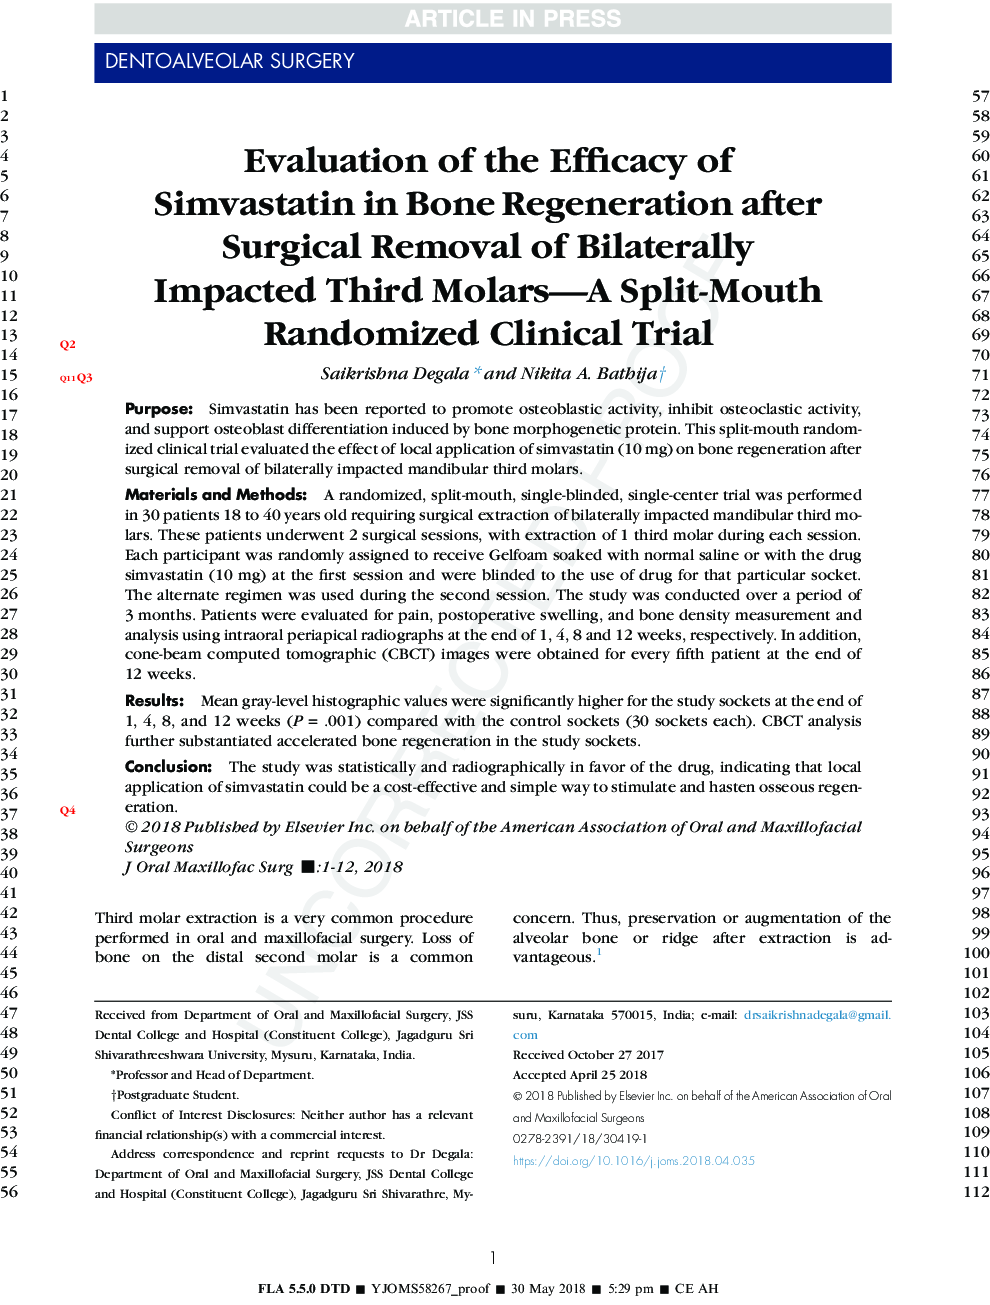 Evaluation of the Efficacy of Simvastatin in Bone Regeneration after Surgical Removal of Bilaterally Impacted Third Molars-A Split-Mouth Randomized Clinical Trial